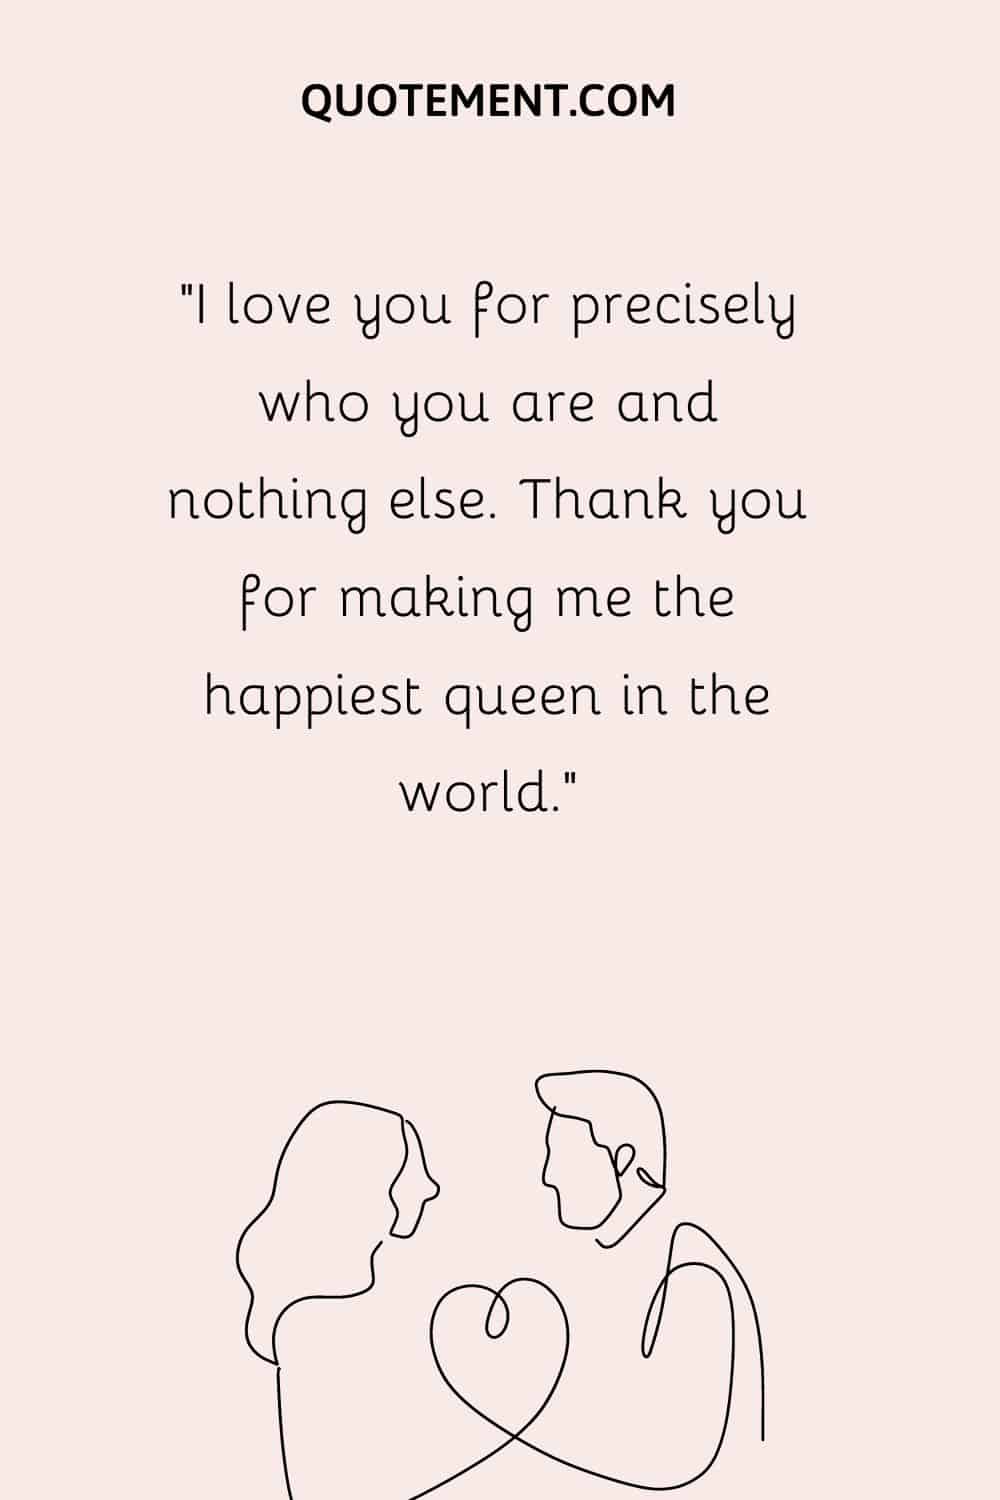 “I love you for precisely who you are and nothing else. Thank you for making me the happiest queen in the world.”